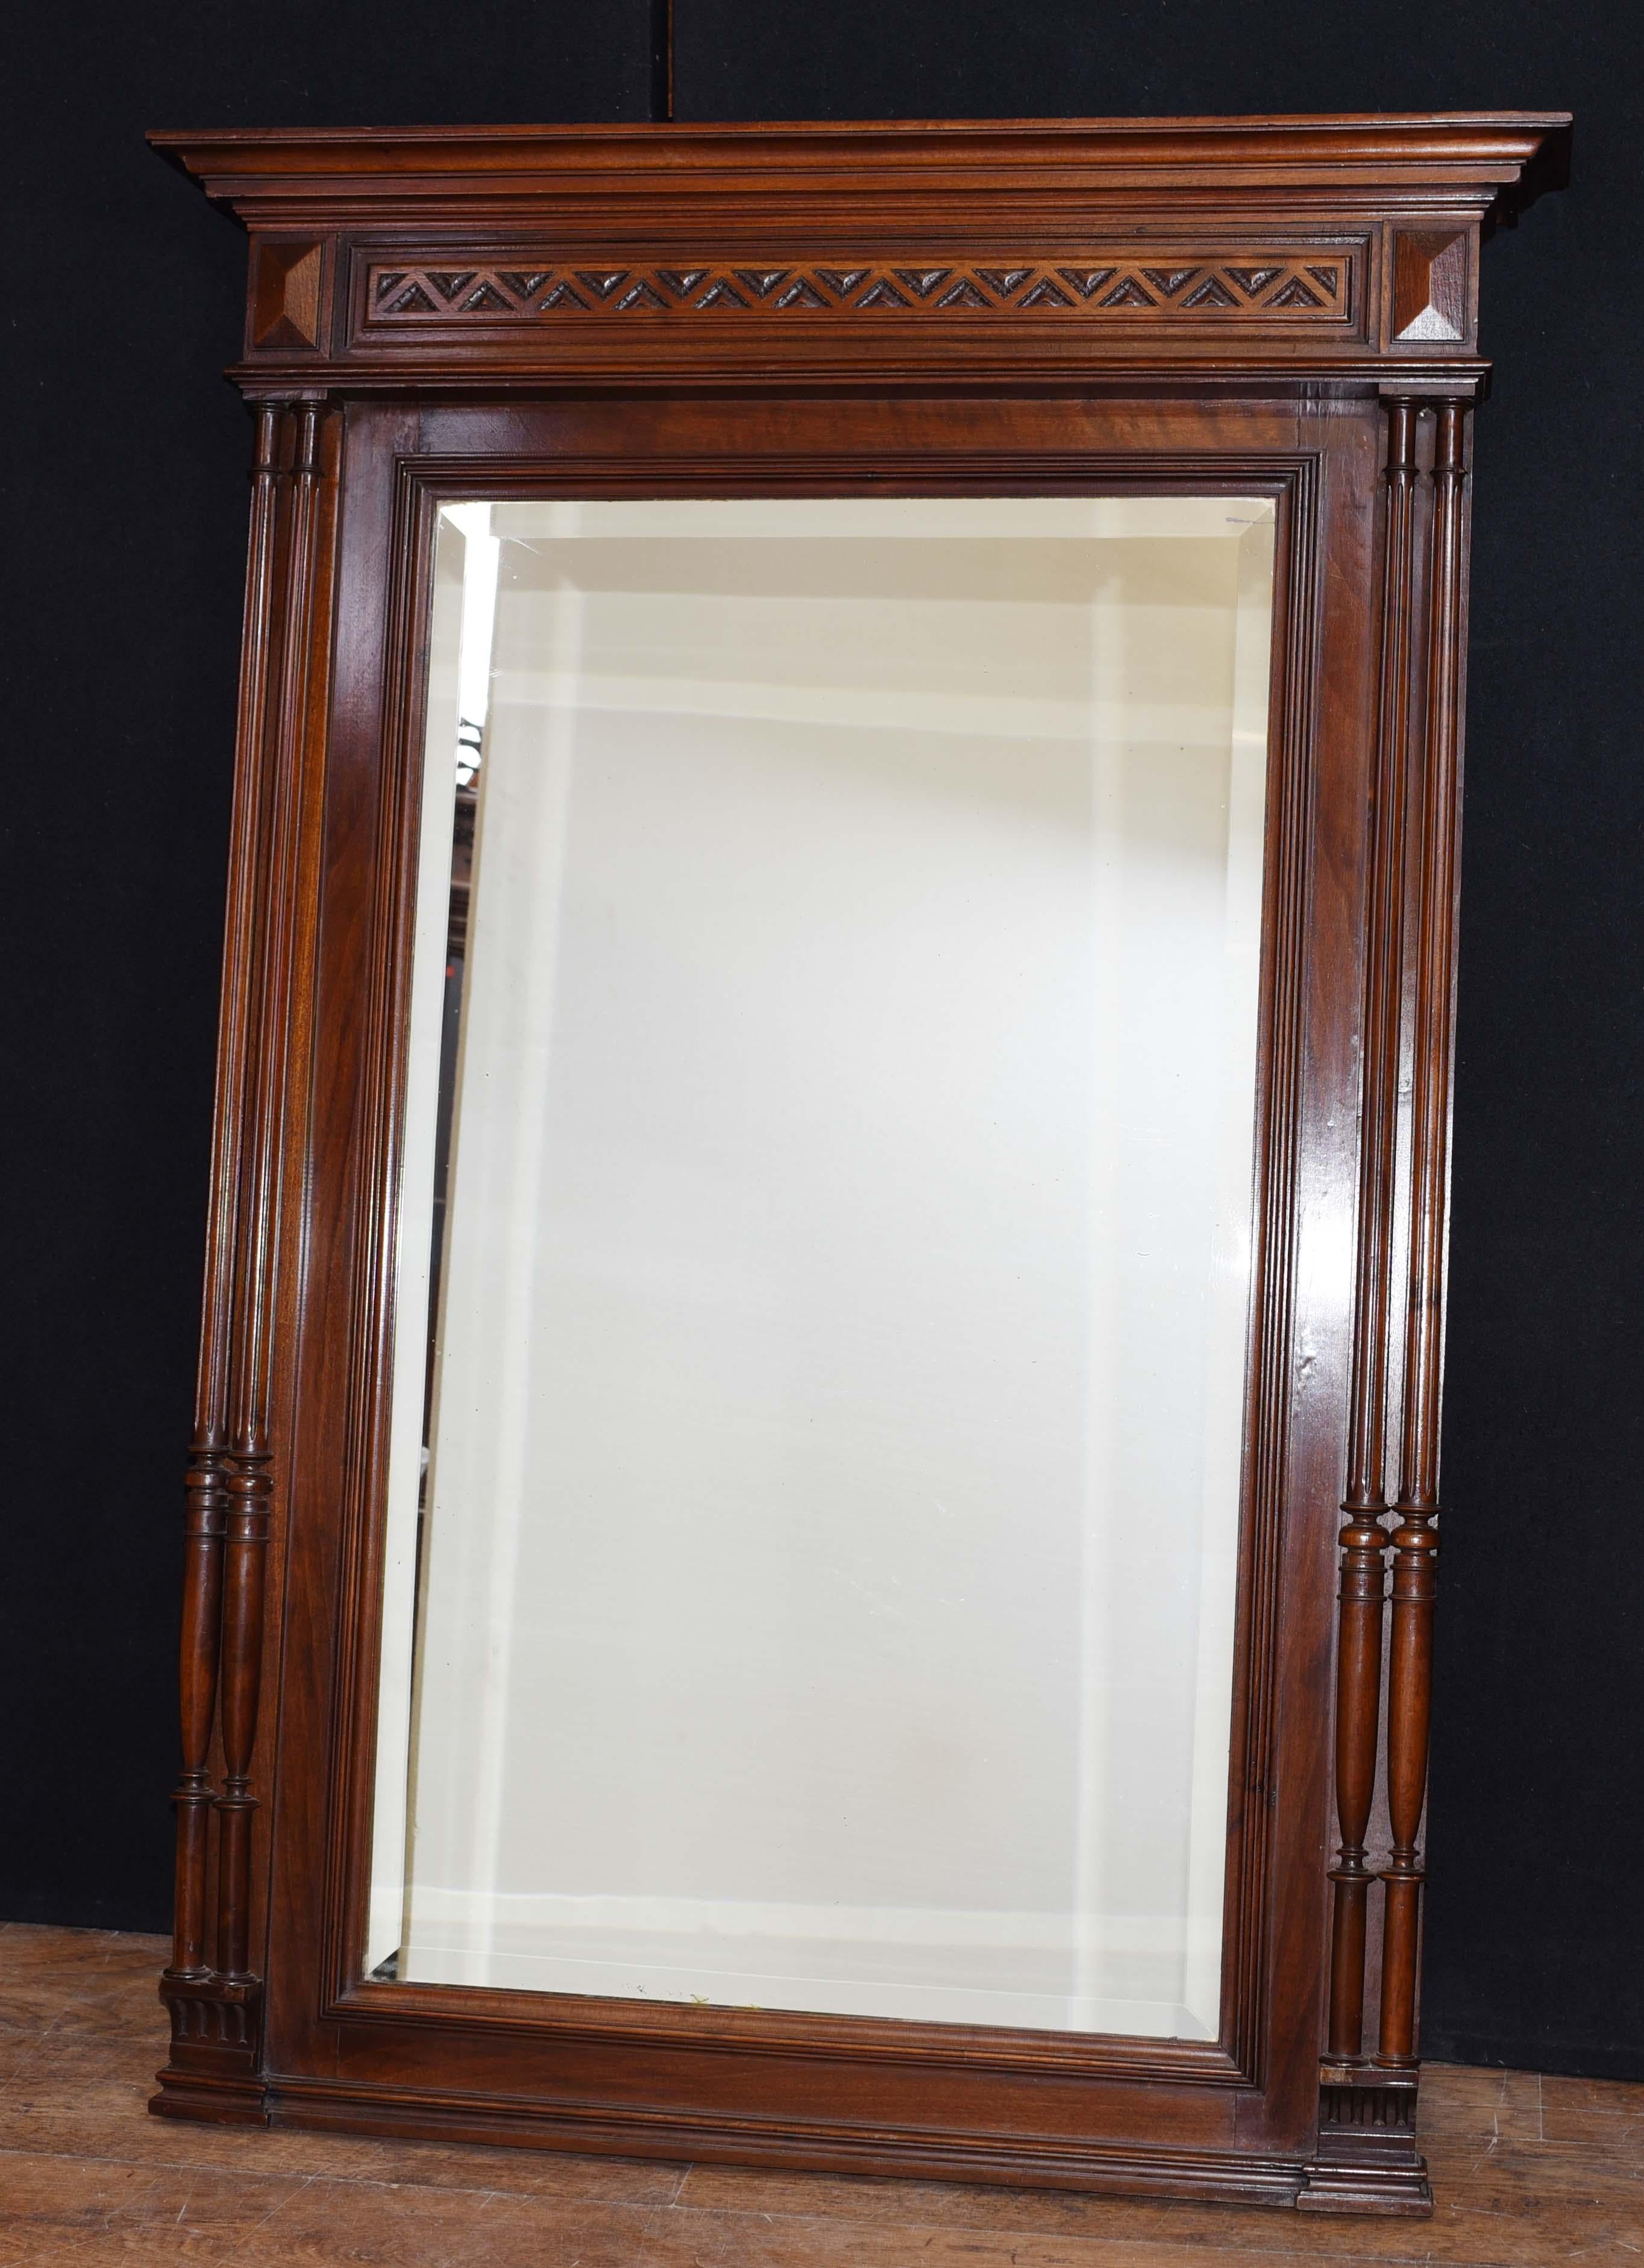 Gorgeous antique Regency mahogany pier mirror
Good size at almost 6 feet tall - 175 CM
Classically refined with temple top and columns either side
We date this to circa 1910.

 